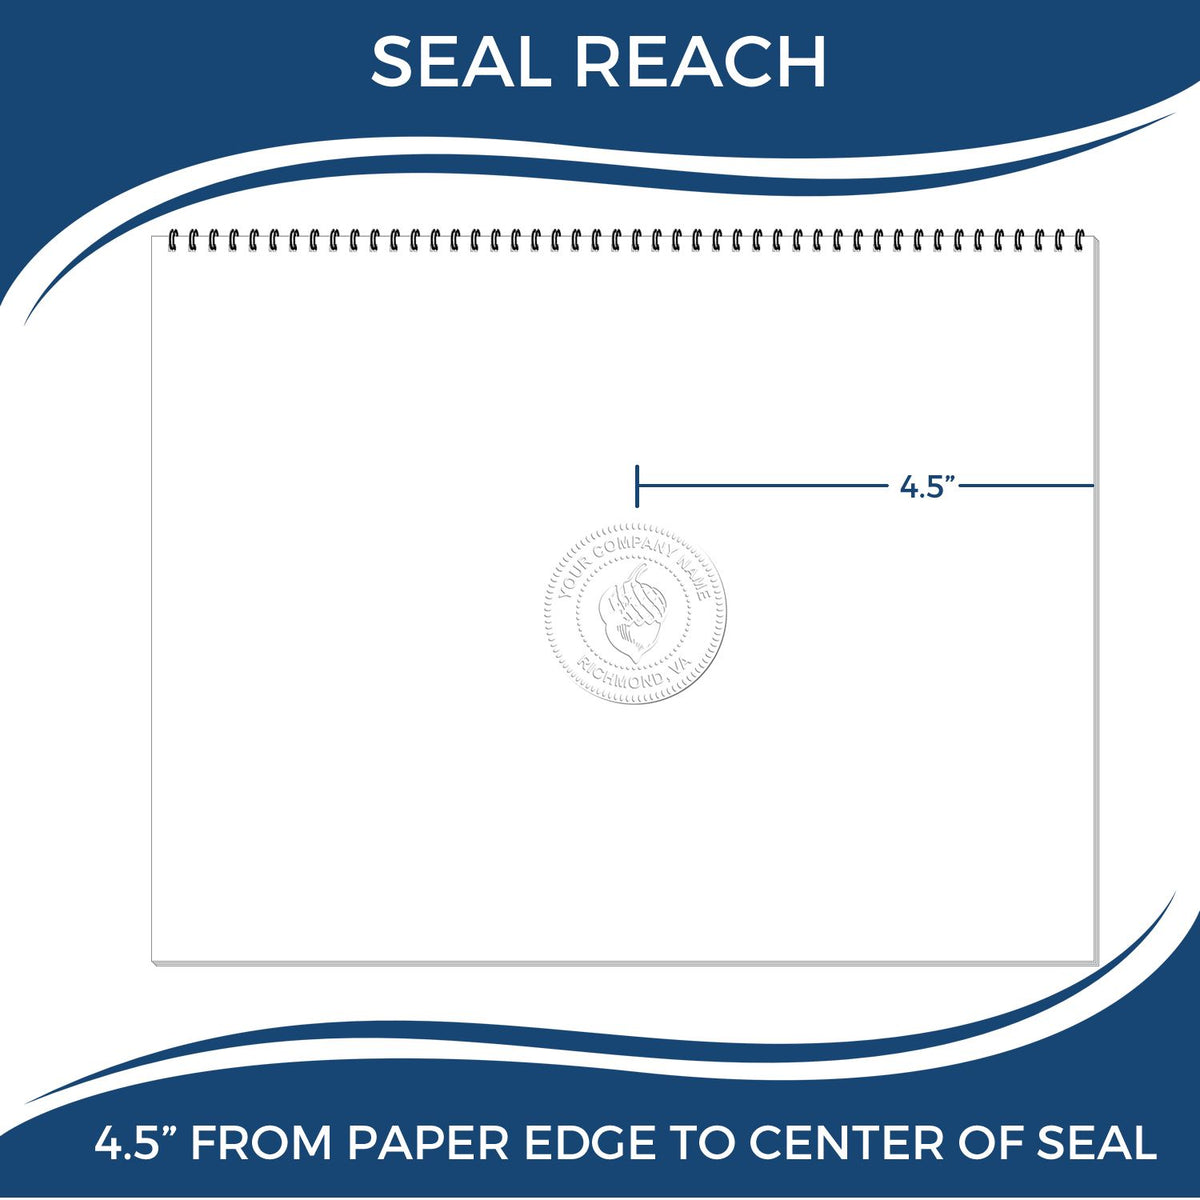 An infographic showing the seal reach which is represented by a ruler and a miniature seal image of the State of Maine Extended Long Reach Geologist Seal